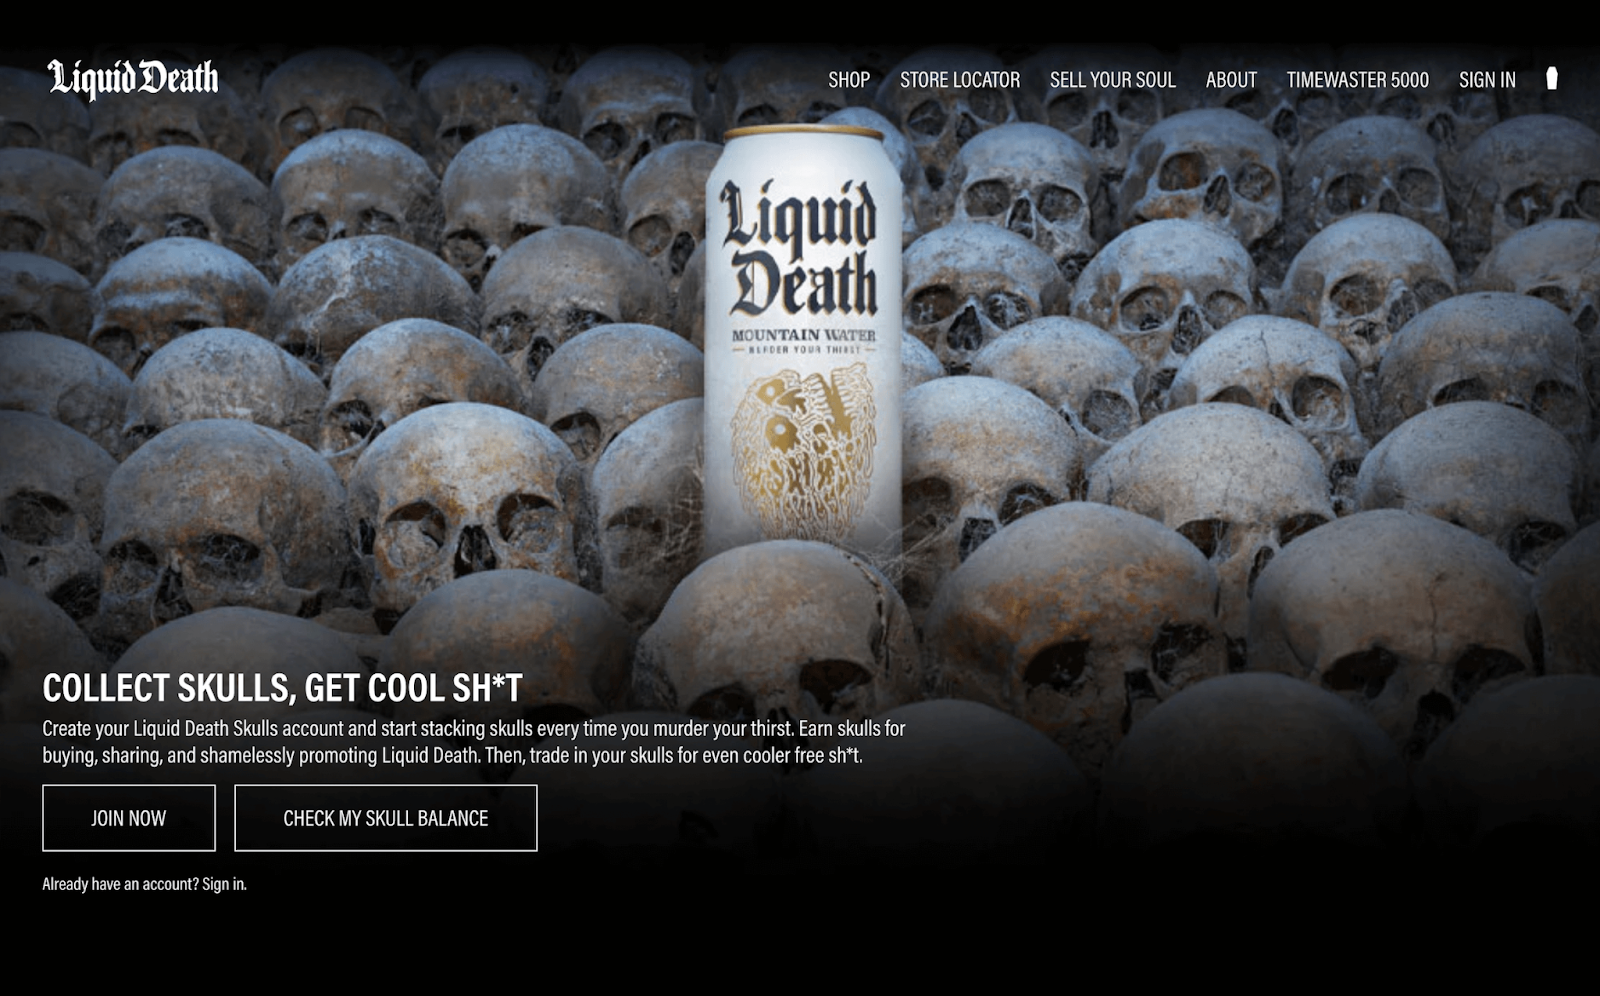 Top 10 Loyalty Programs 2022–A screenshot from Liquid Death’s loyalty program explainer page. There is a white can of their Liquid Death Mountain Water among a floor of skulls. The text reads, “Collect Skulls, Get Cool Sh*t. Create your Liquid Death Skulls account and start stacking skulls every time you murder your thirst. Earn skulls for buying, sharing, and shamelessly promoting Liquid Death. Then, trade in your skulls for even cooler free sh*t.” There are two buttons at the bottom that read, “Join Now” and “Check My Skull Balance”. 